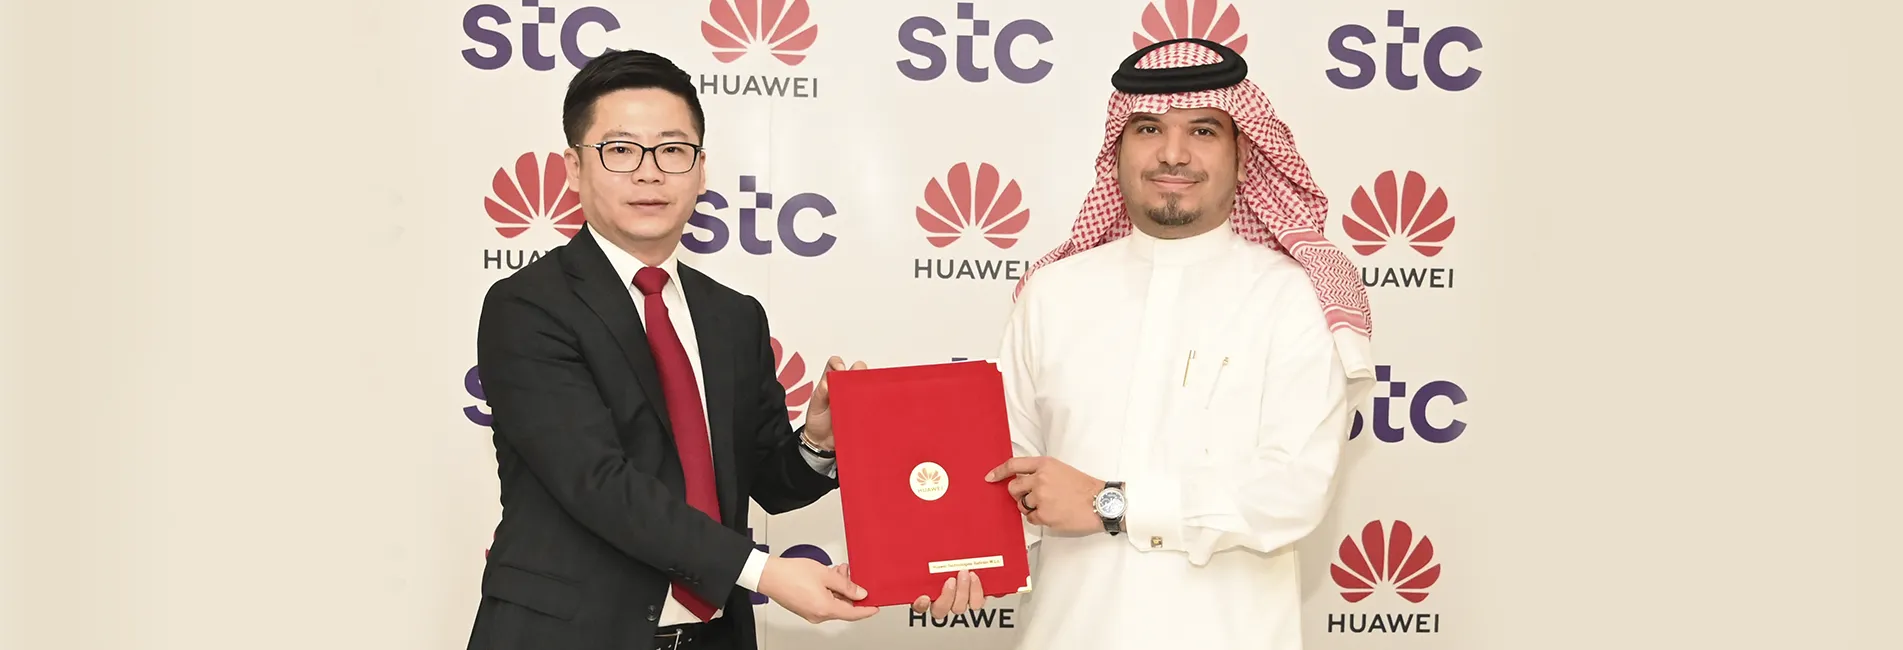 huawei content delivery